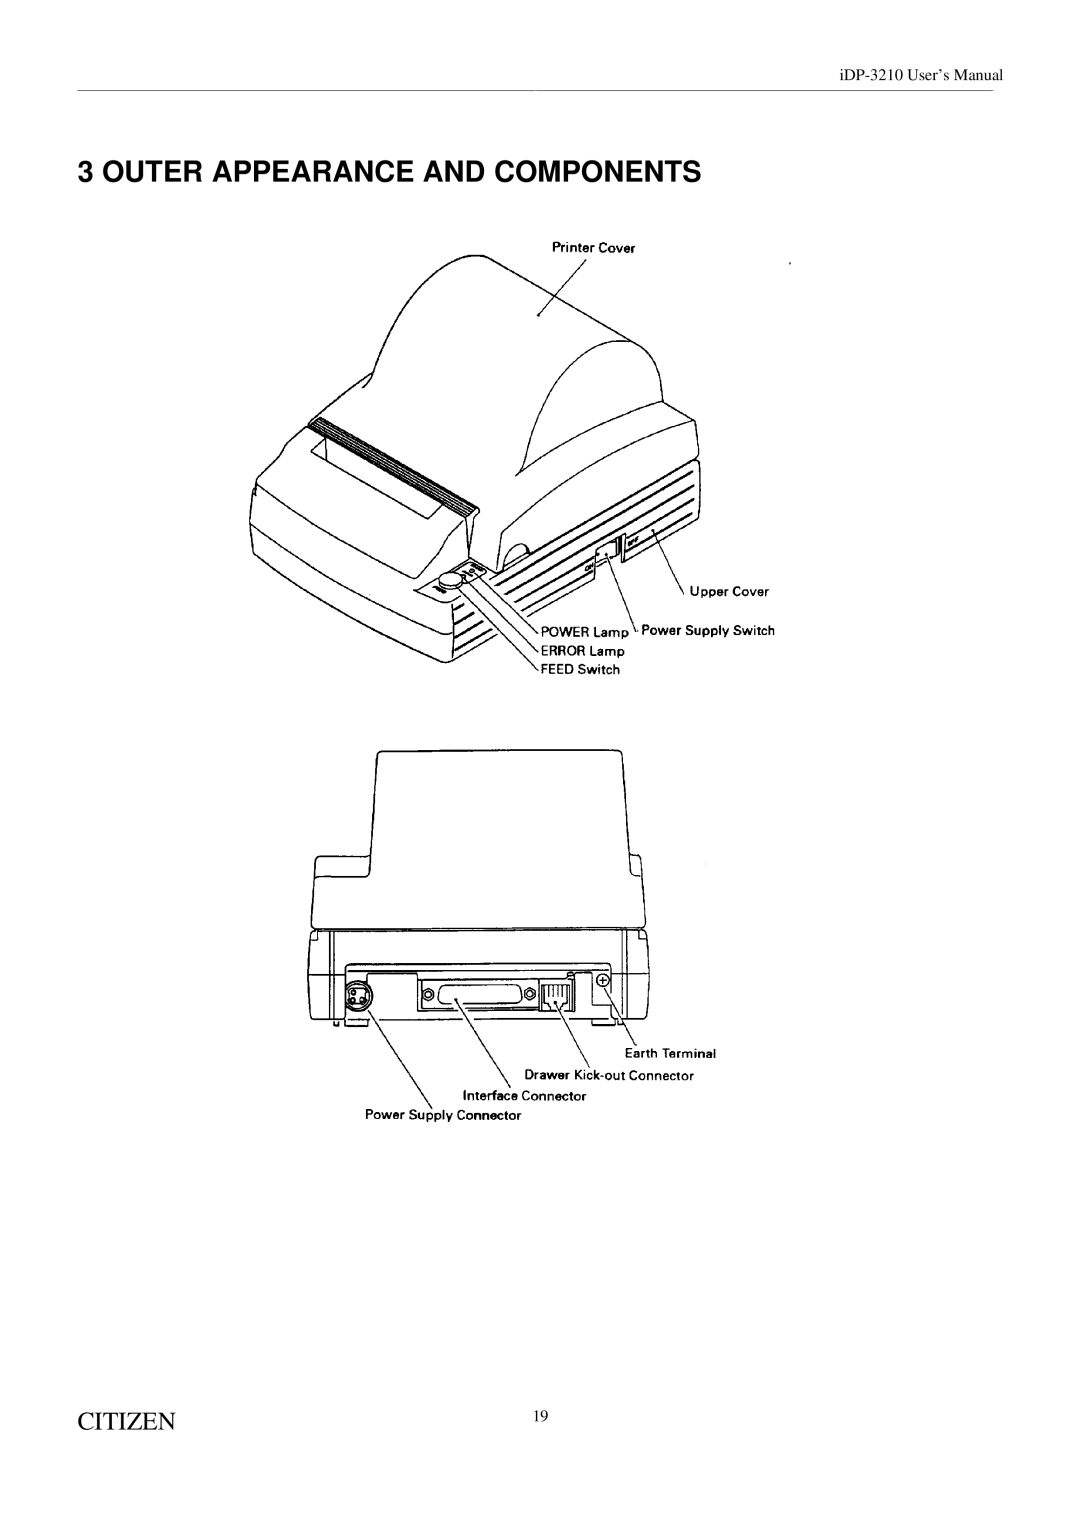 Citizen Systems iDP-3210 user manual Outer Appearance and Components 